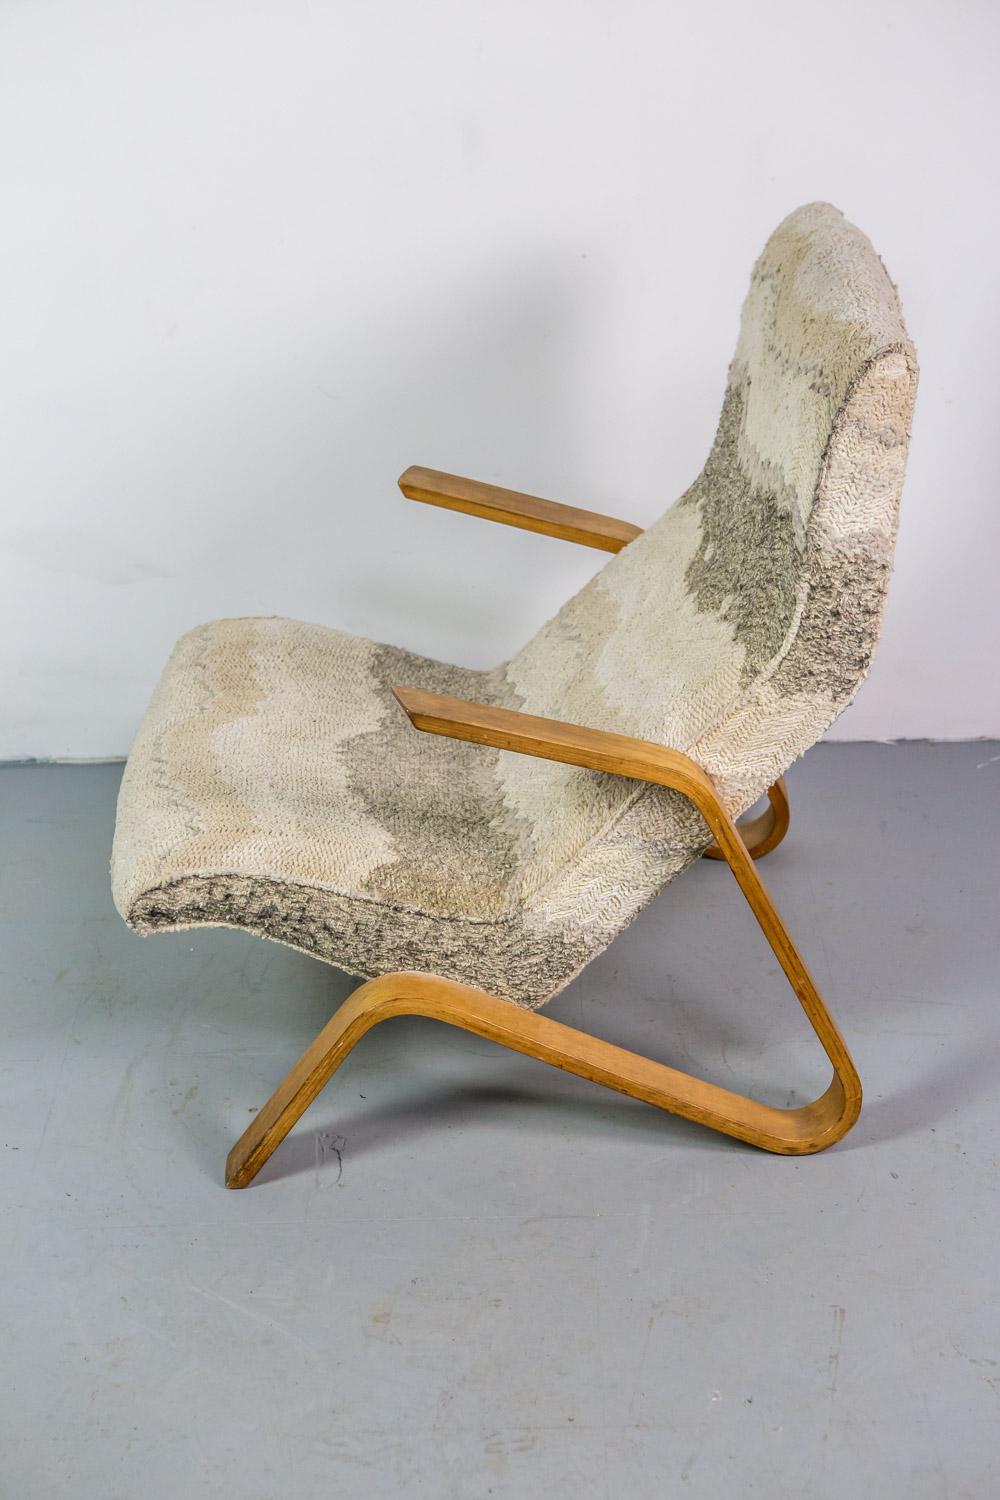 Early Grasshopper Chair by Eero Saarinen for Knoll (Bugholz)